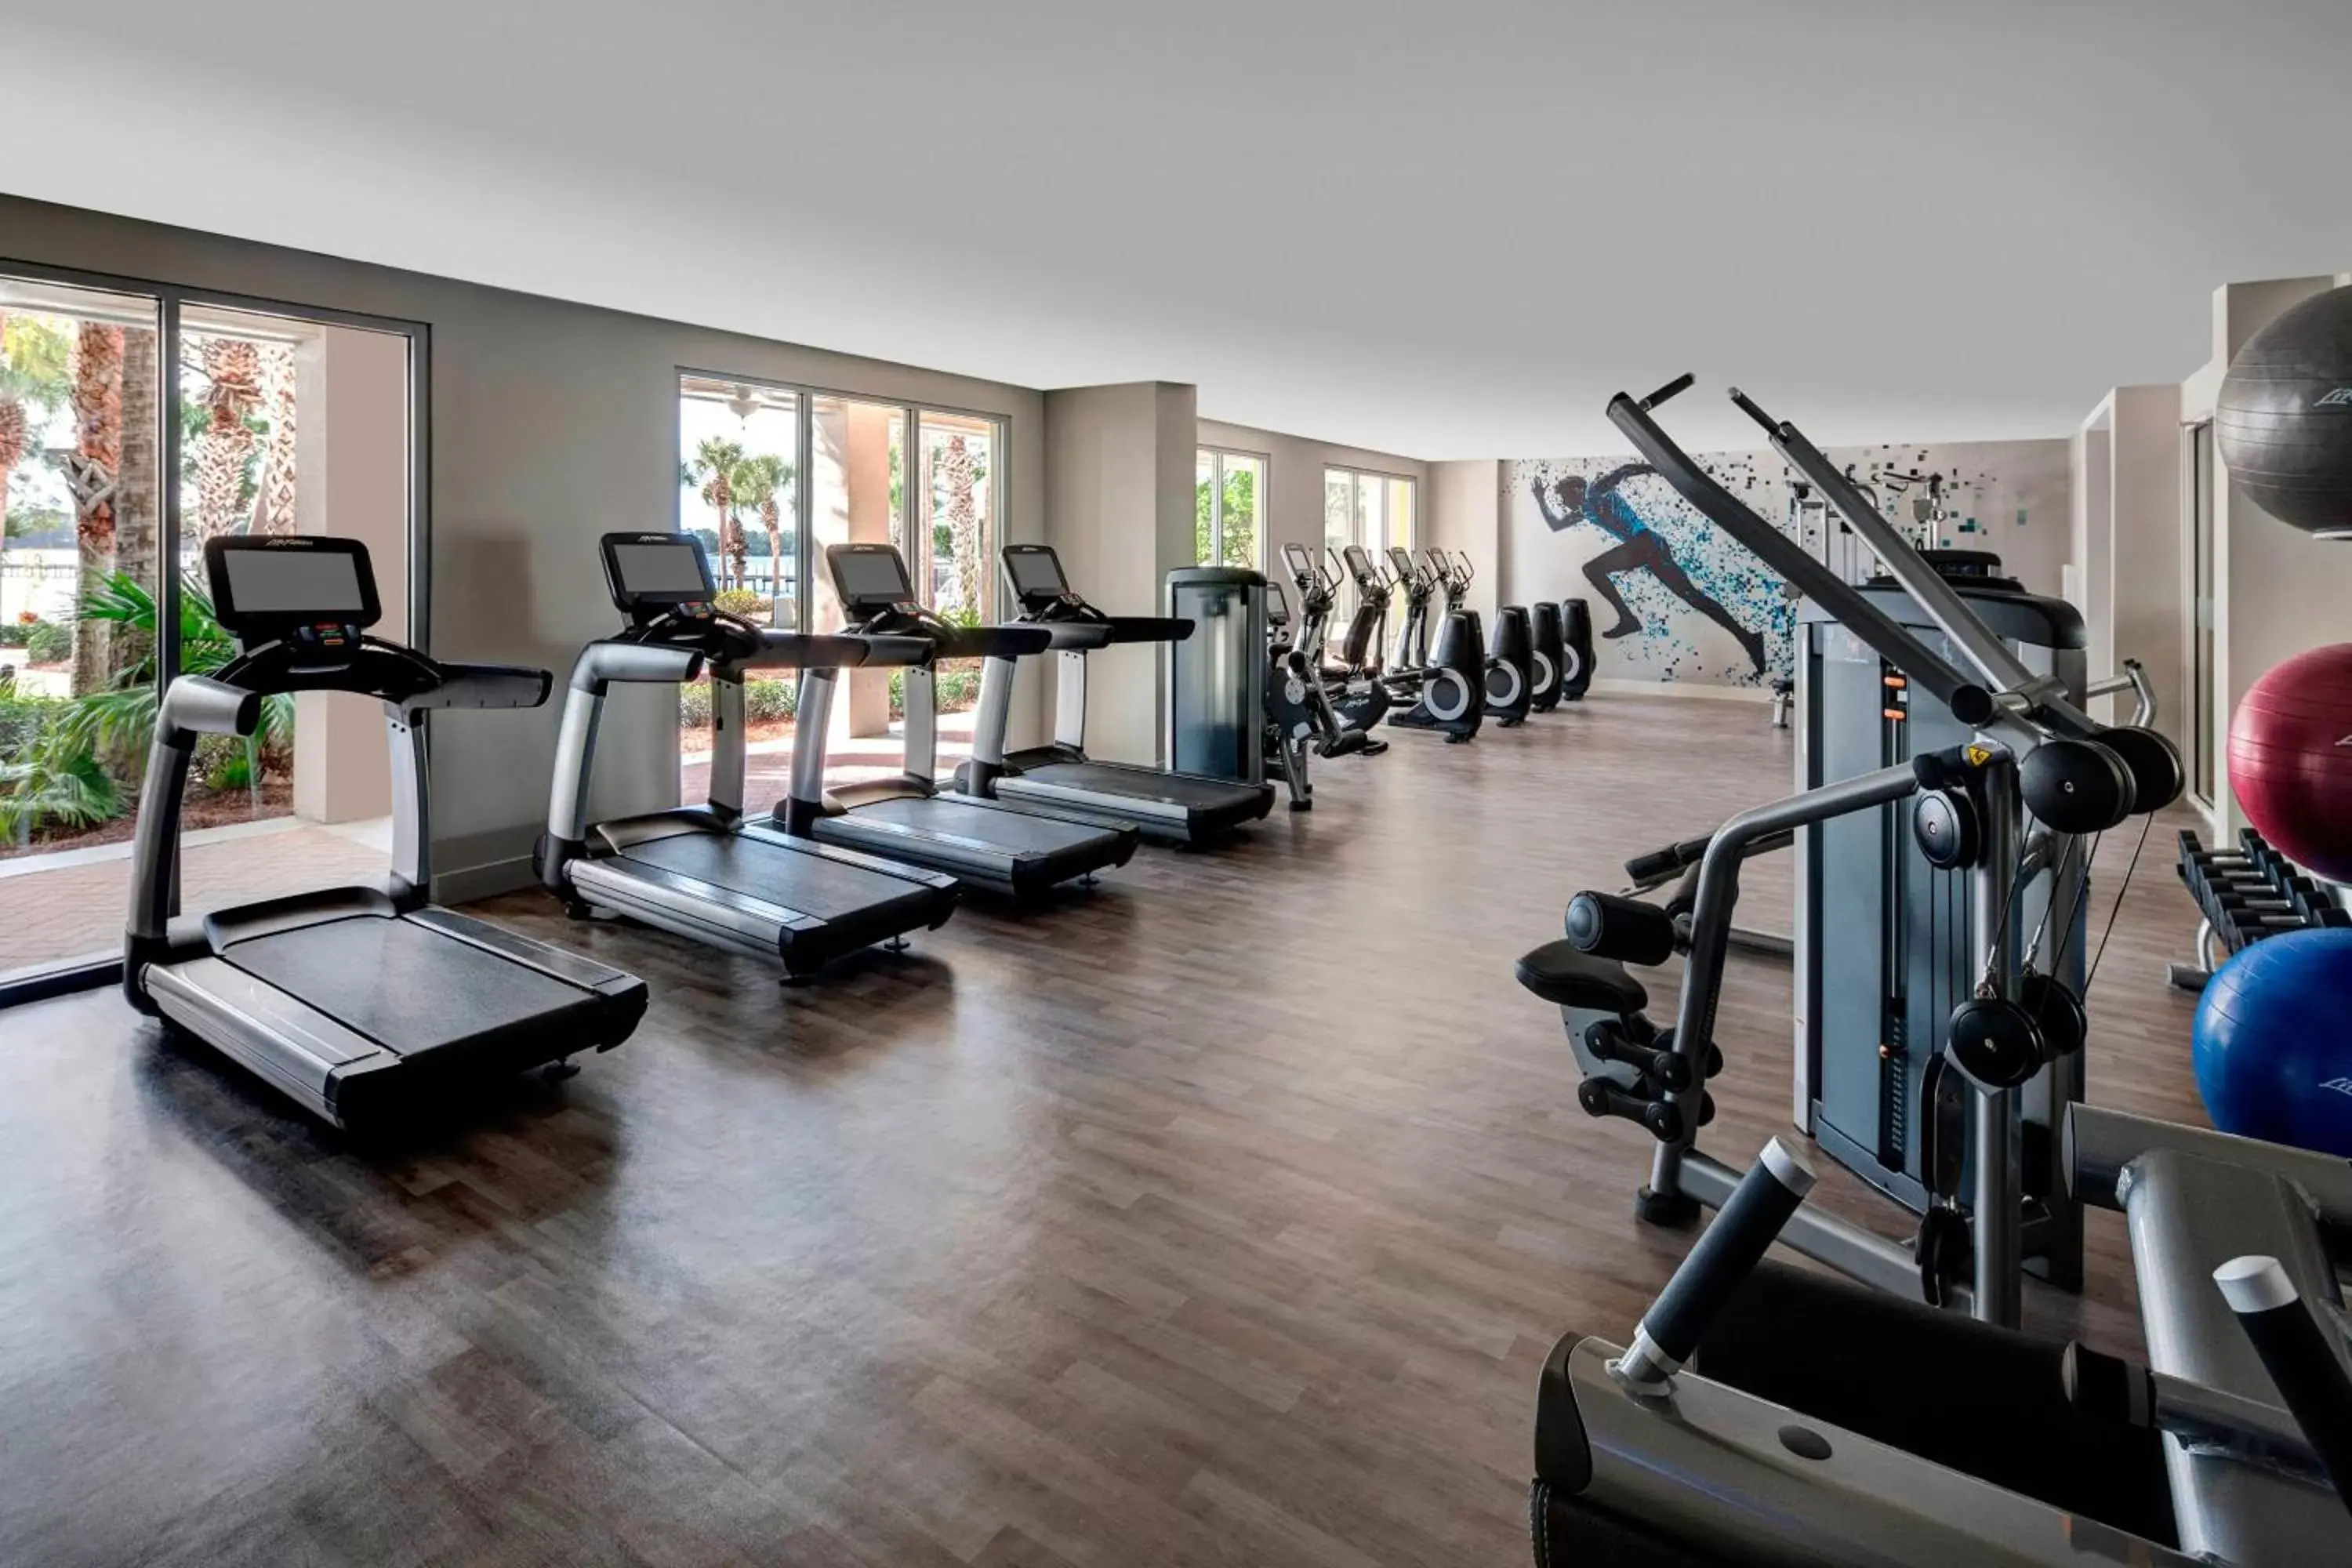 Fitness centre/facilities, Fitness Center/Facilities in Bluegreen's Bayside Resort and Spa at Panama City Beach